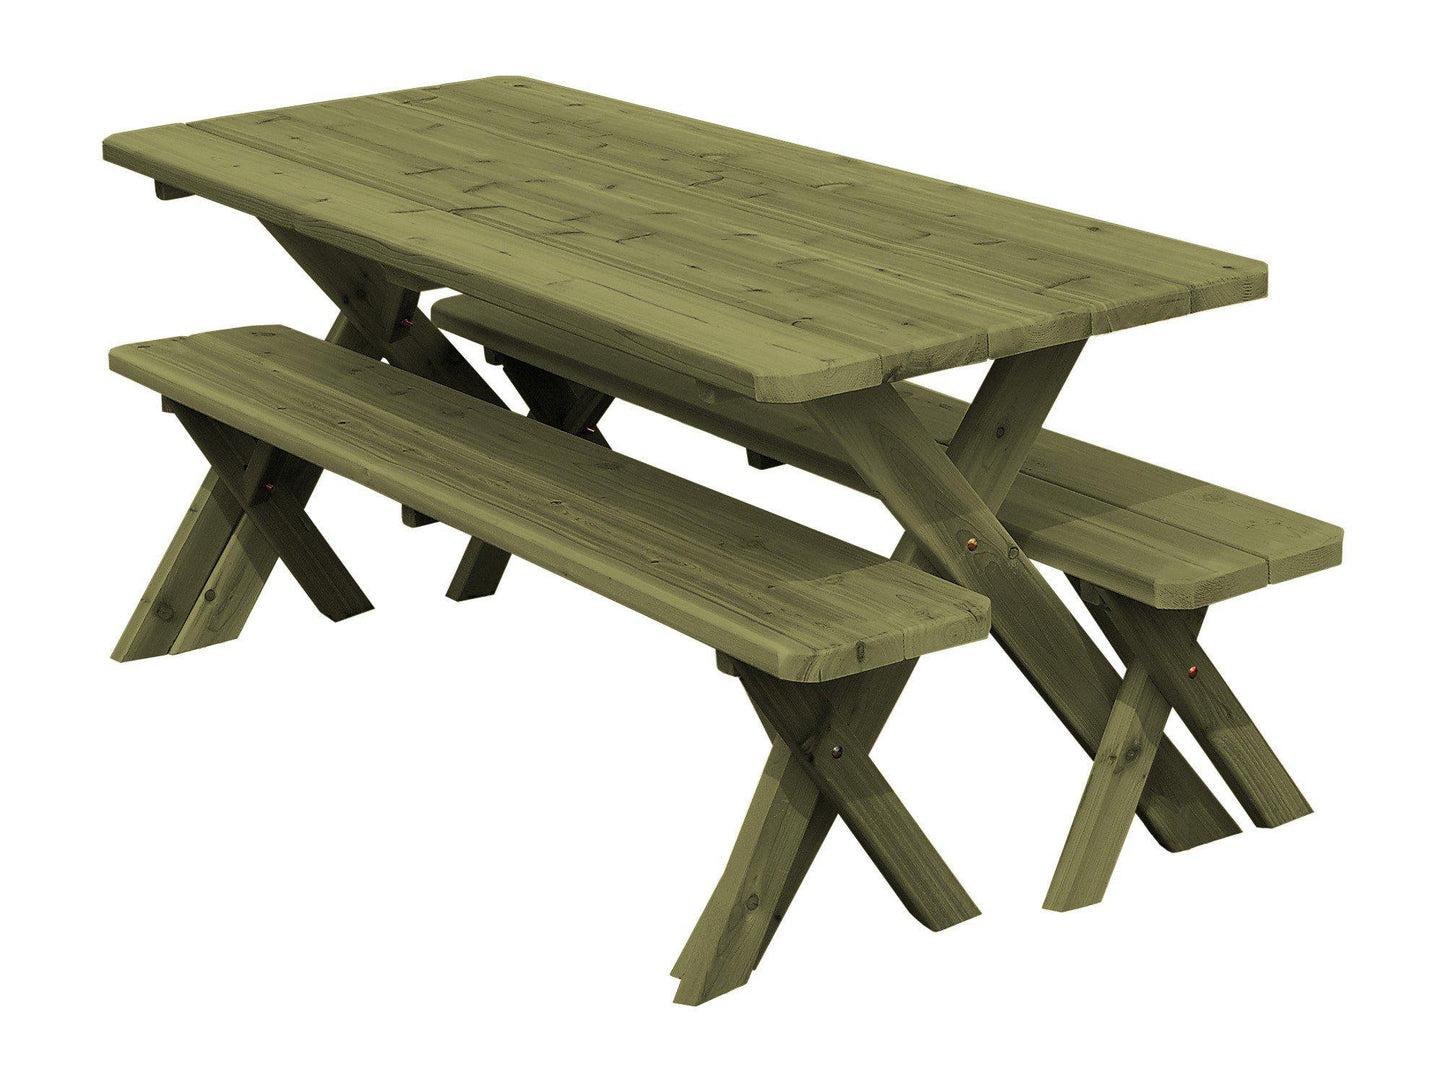 A&L FURNITURE CO. Western Red Cedar  6' Cross-leg Table w/2 Benches - Specify for FREE 2" Umbrella Hole - LEAD TIME TO SHIP 2 WEEKS